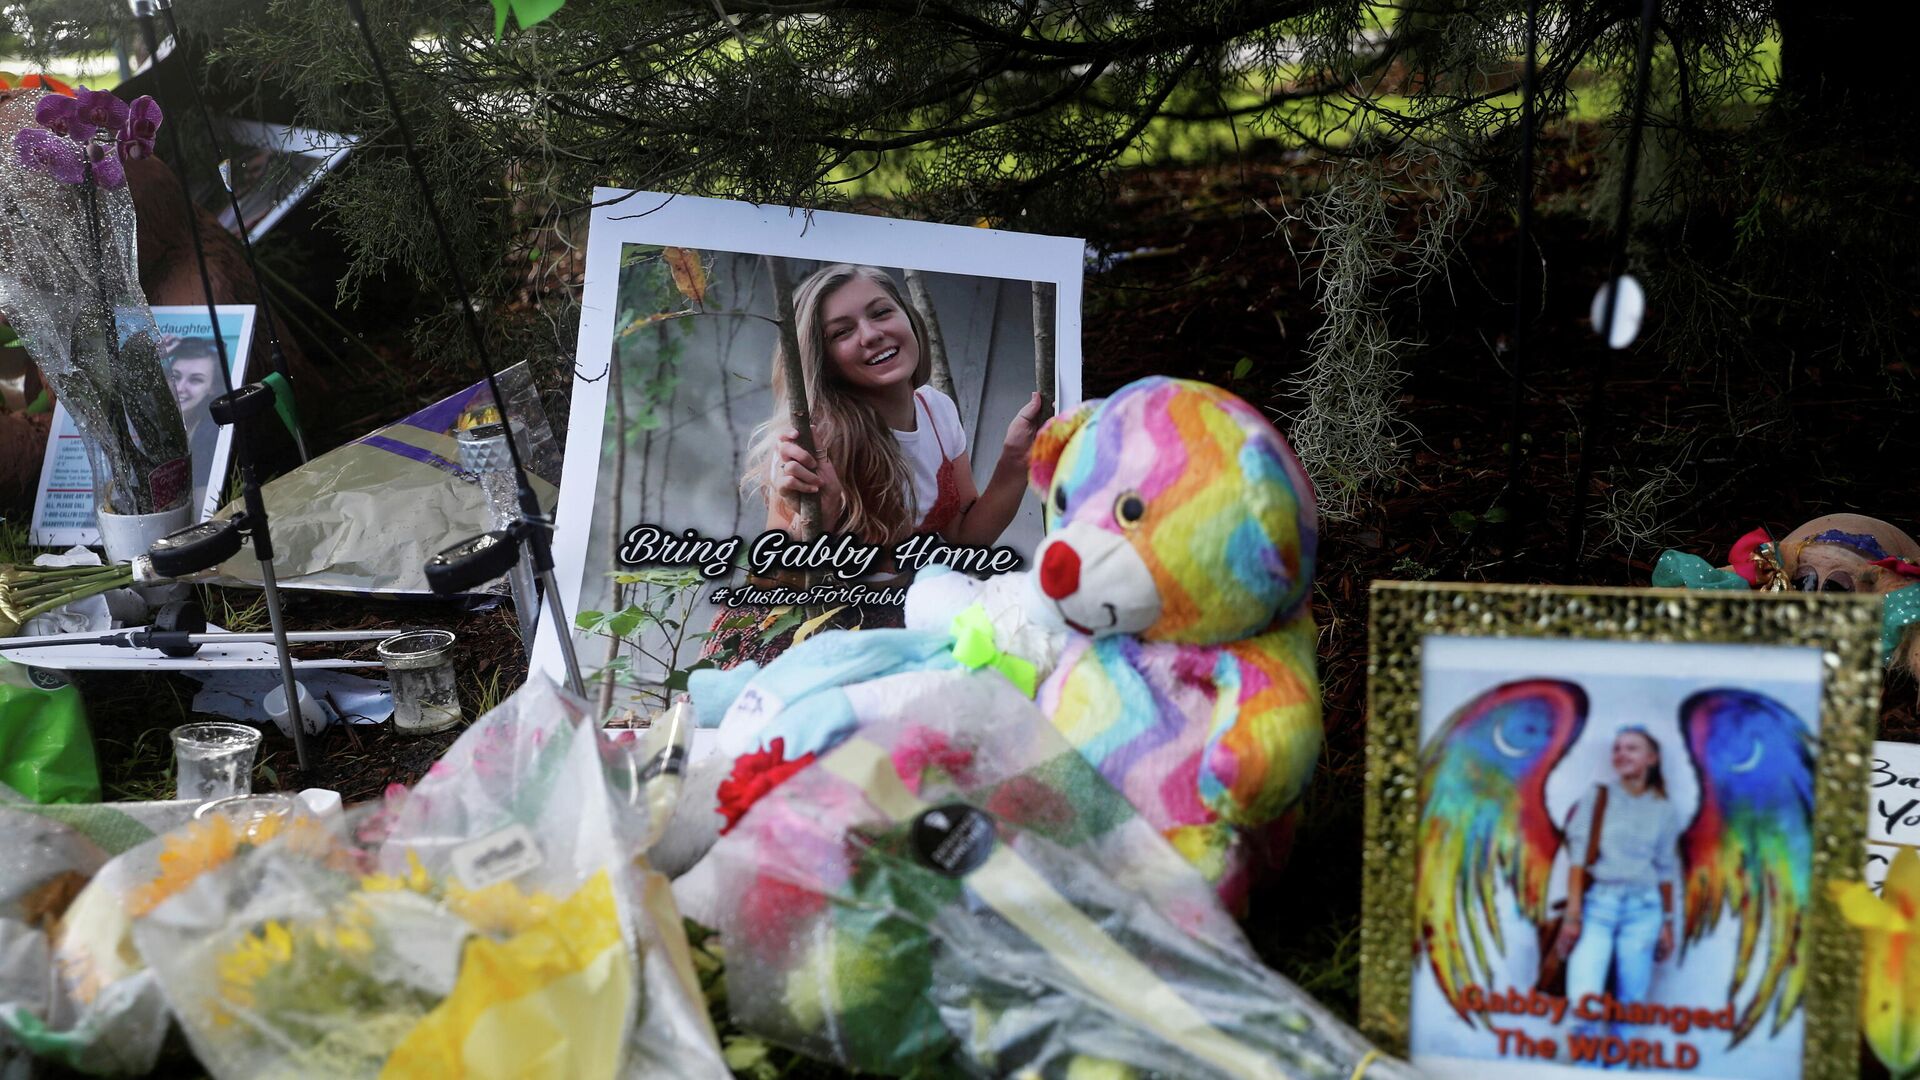 A makeshift memorial for Gabby Petito is seen, after a woman's body found in a Wyoming national park was identified as that of the missing 22-year-old travel blogger, near North Port City Hall in North Port, Florida, U.S., September 22, 2021 - Sputnik International, 1920, 12.10.2021